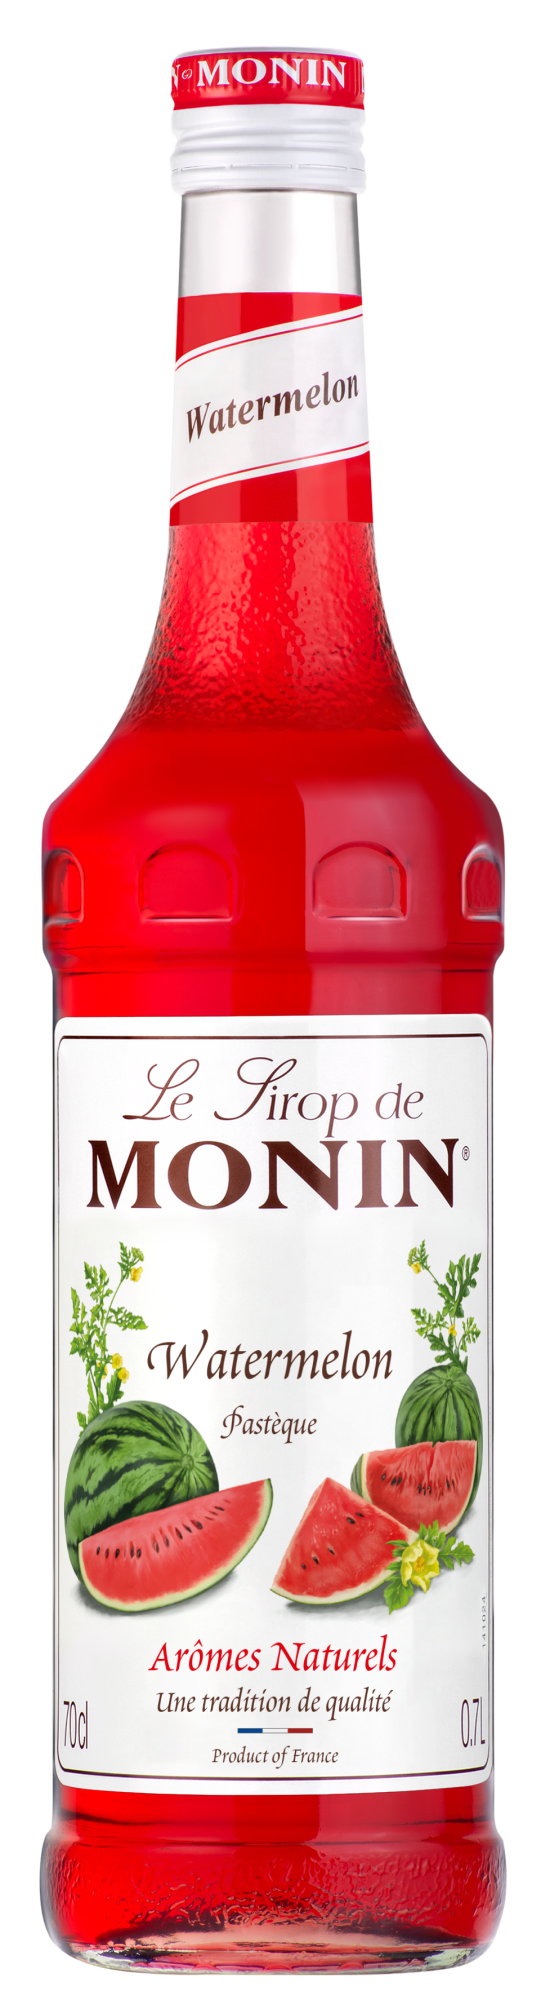 Buy MONIN Watermelon syrup. It brings the thirst quenching, juiciness we all know when biting into a watermelon